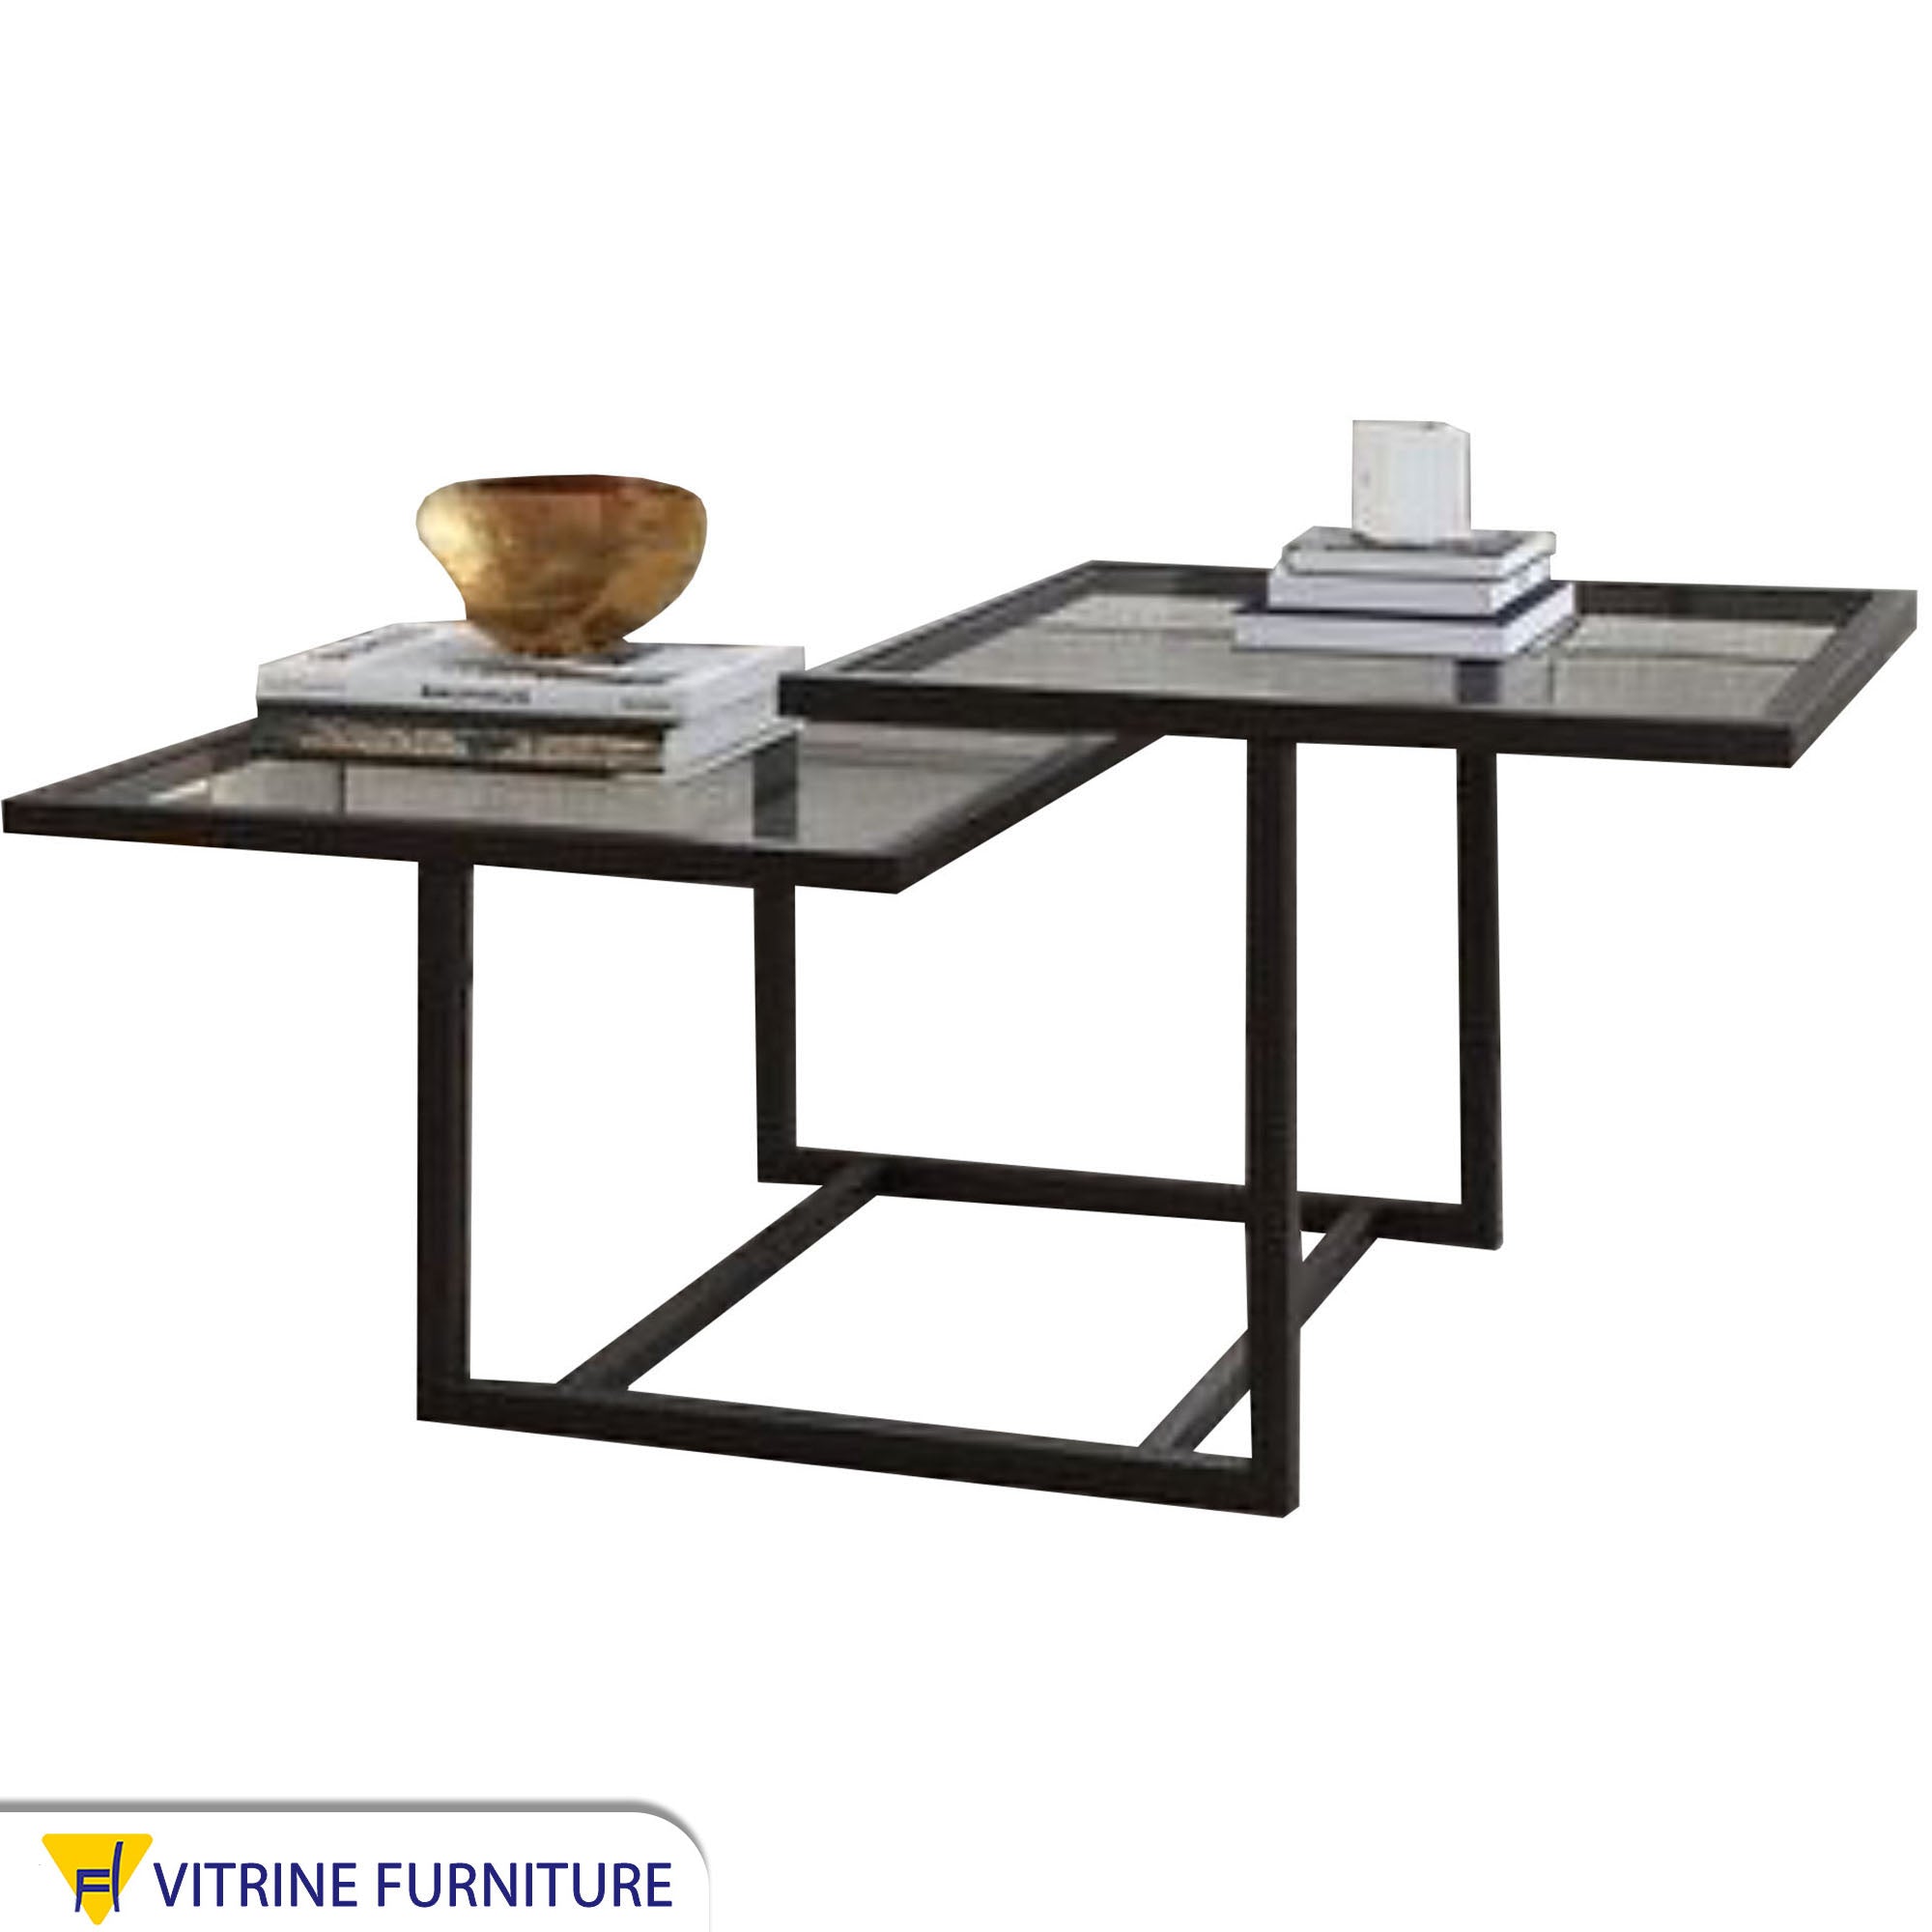 Modern table with two levels